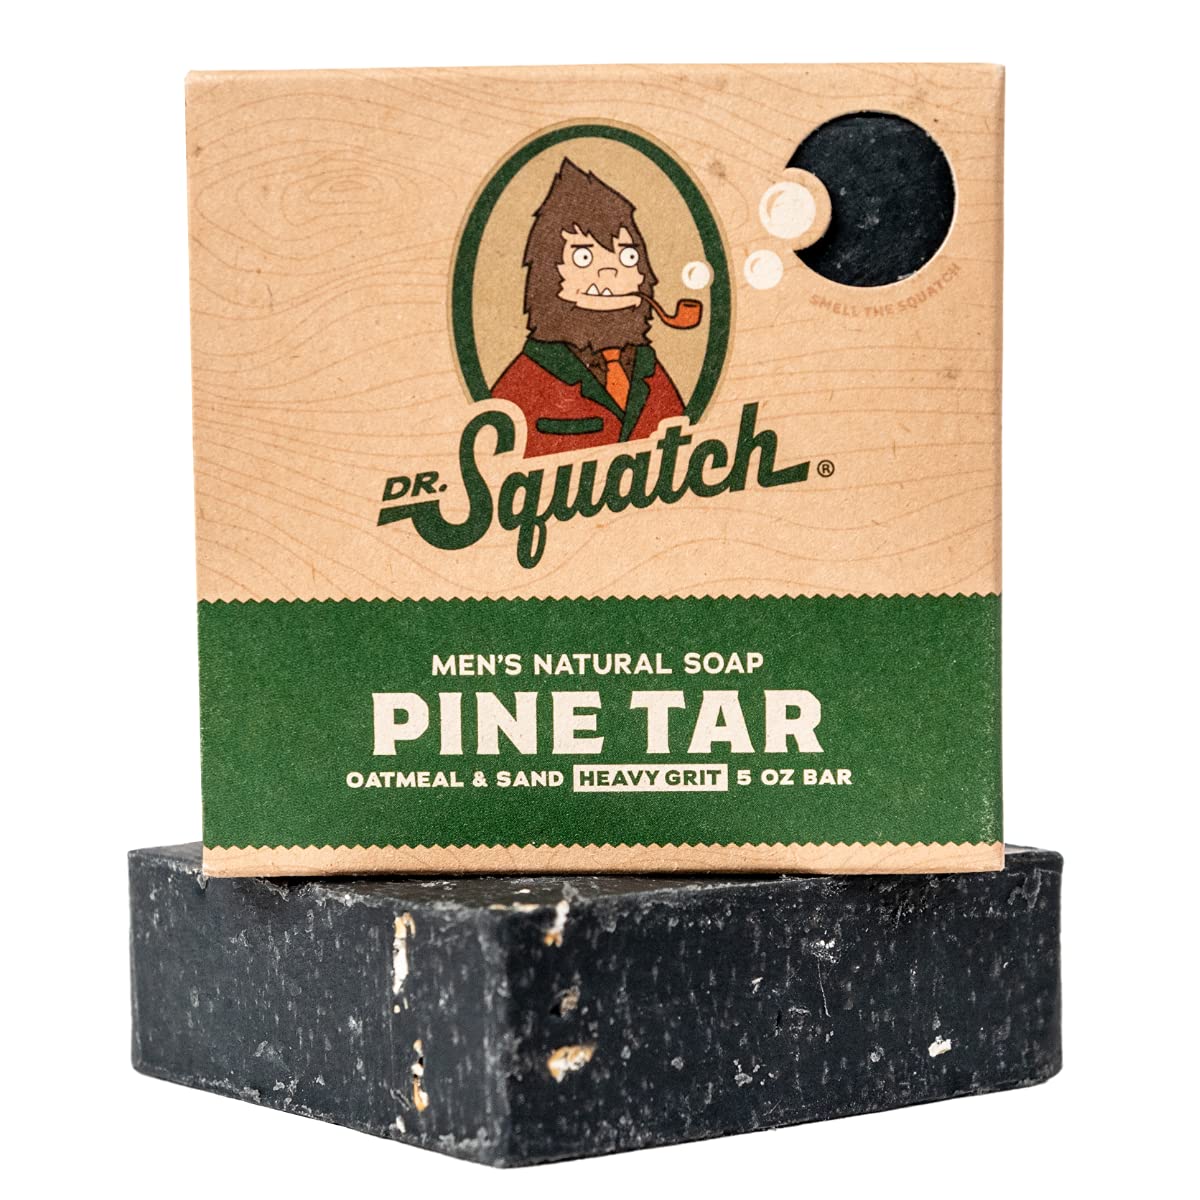 Dr. Squatch Bay Rum Bar Soap - Grooming Lounge